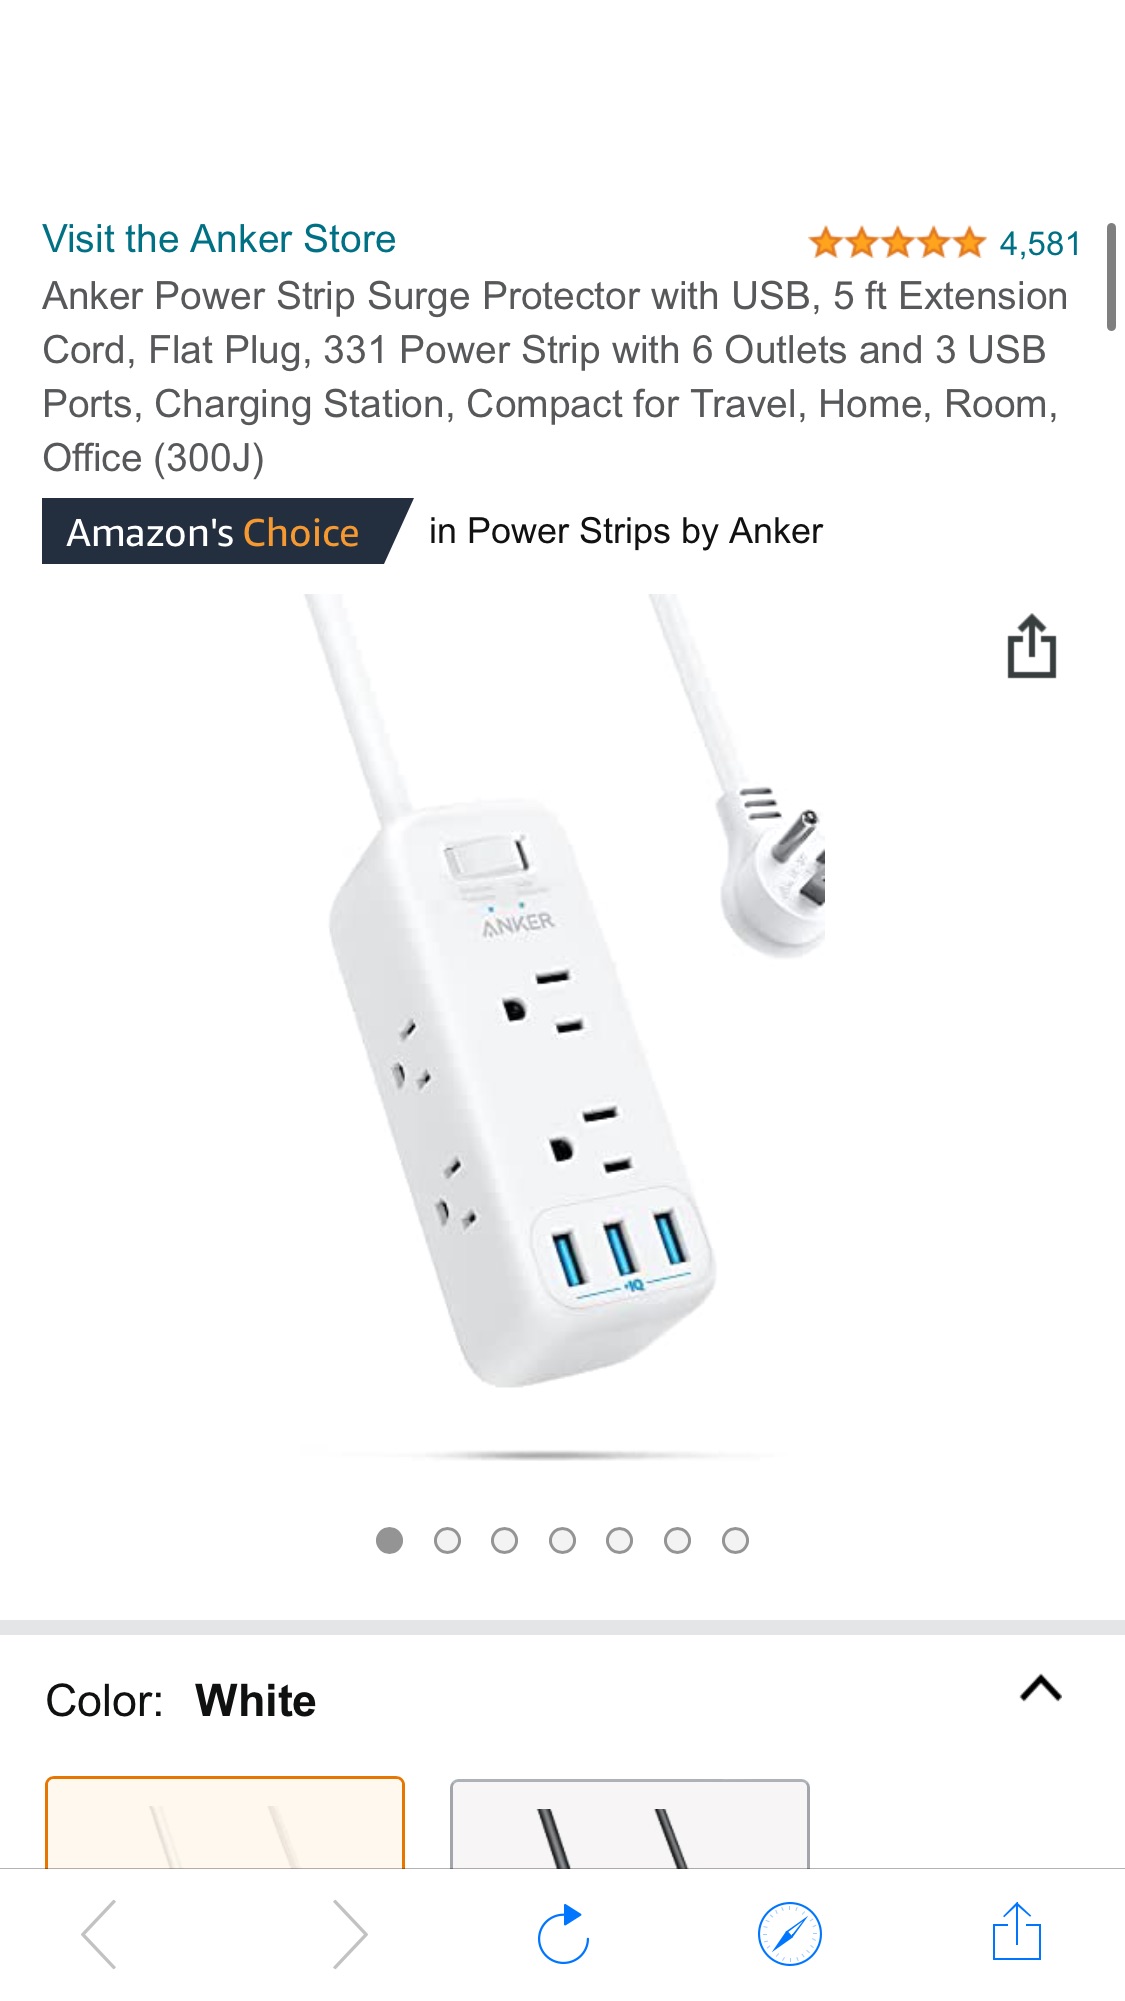 Anker Power Strip Surge Protector with USB, 5 ft Extension Cord, Flat Plug, 331 Power Strip with 6 Outlets and 3 USB Ports, 电源插座